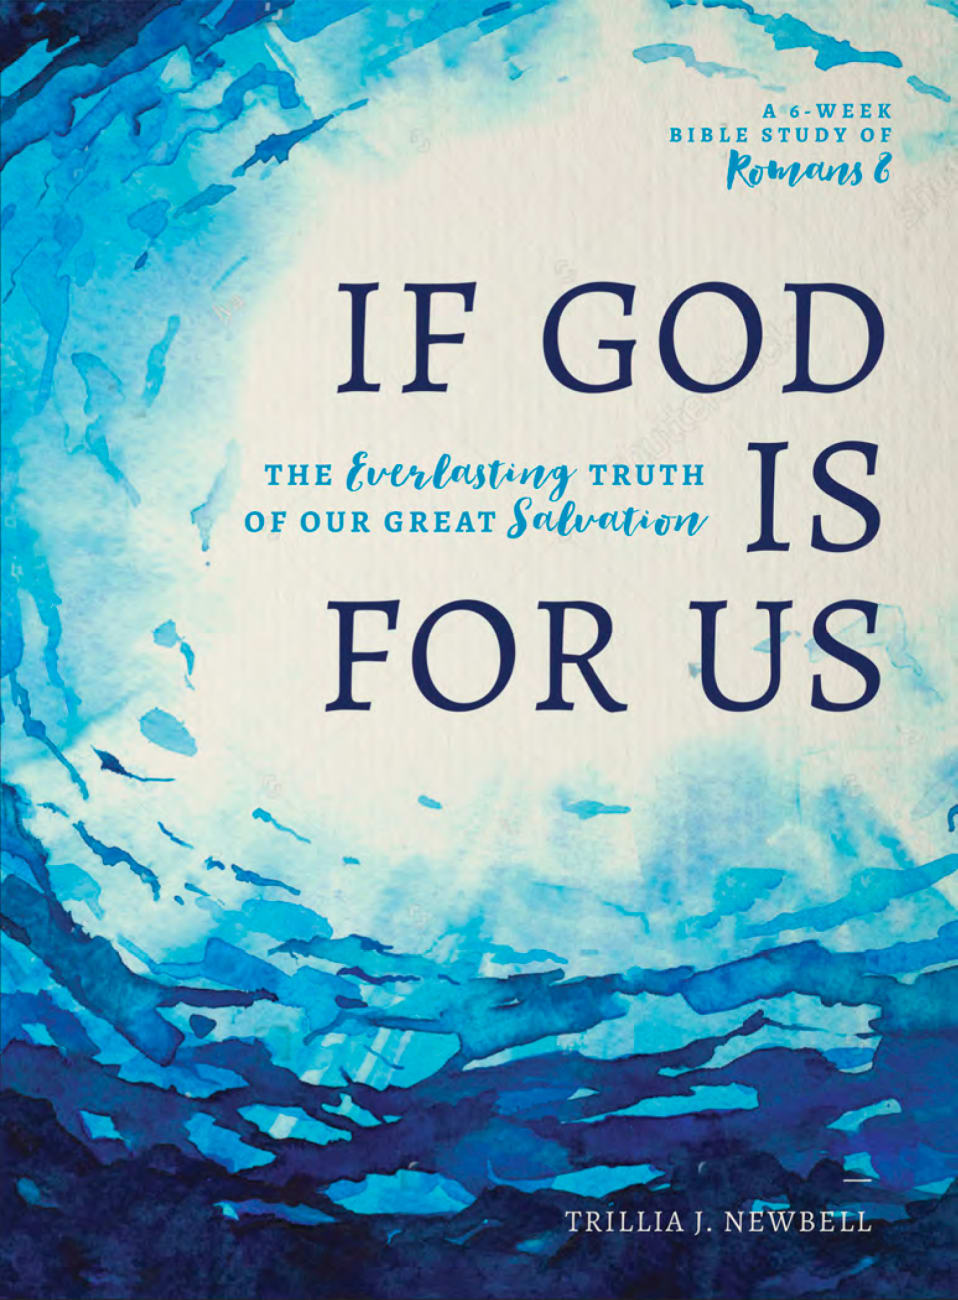 If God is For Us: The Everlasting Truth of Our Great Salvation (6 Week Study) Paperback